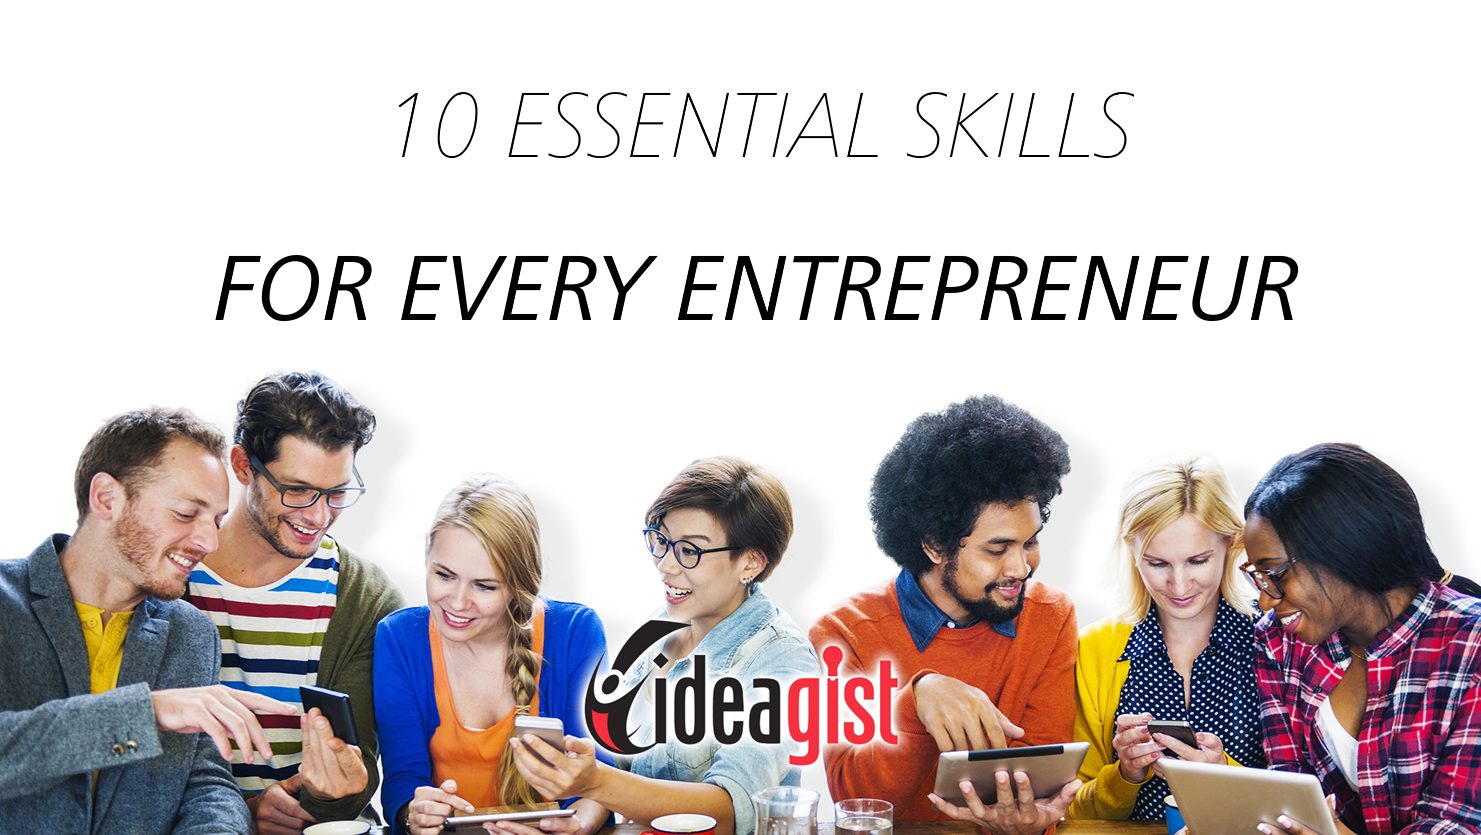 10 skills that are essential for every entrepreneur to learn